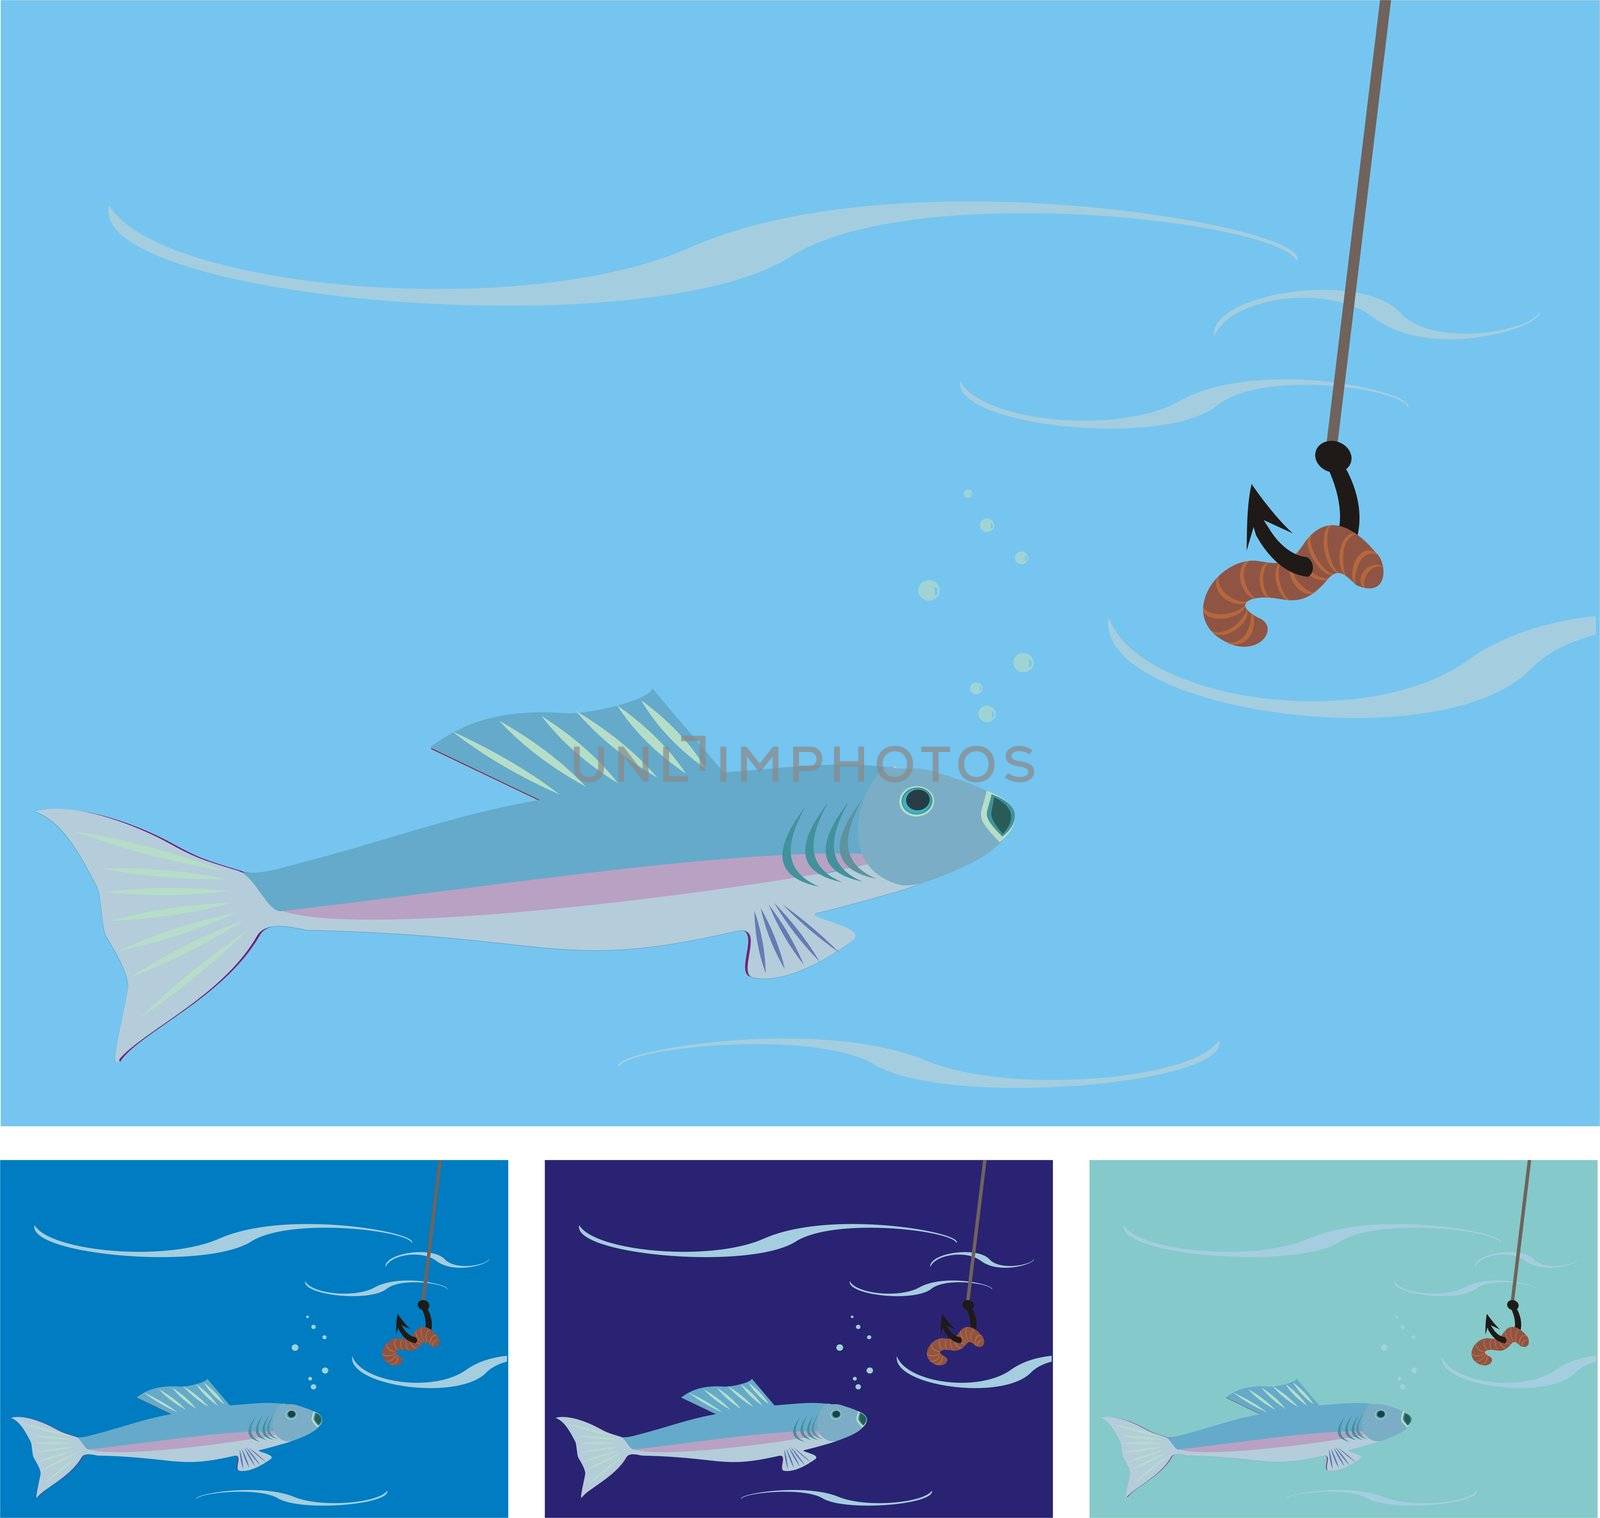 fishing illustration: fish is about to eat the worm on the hook